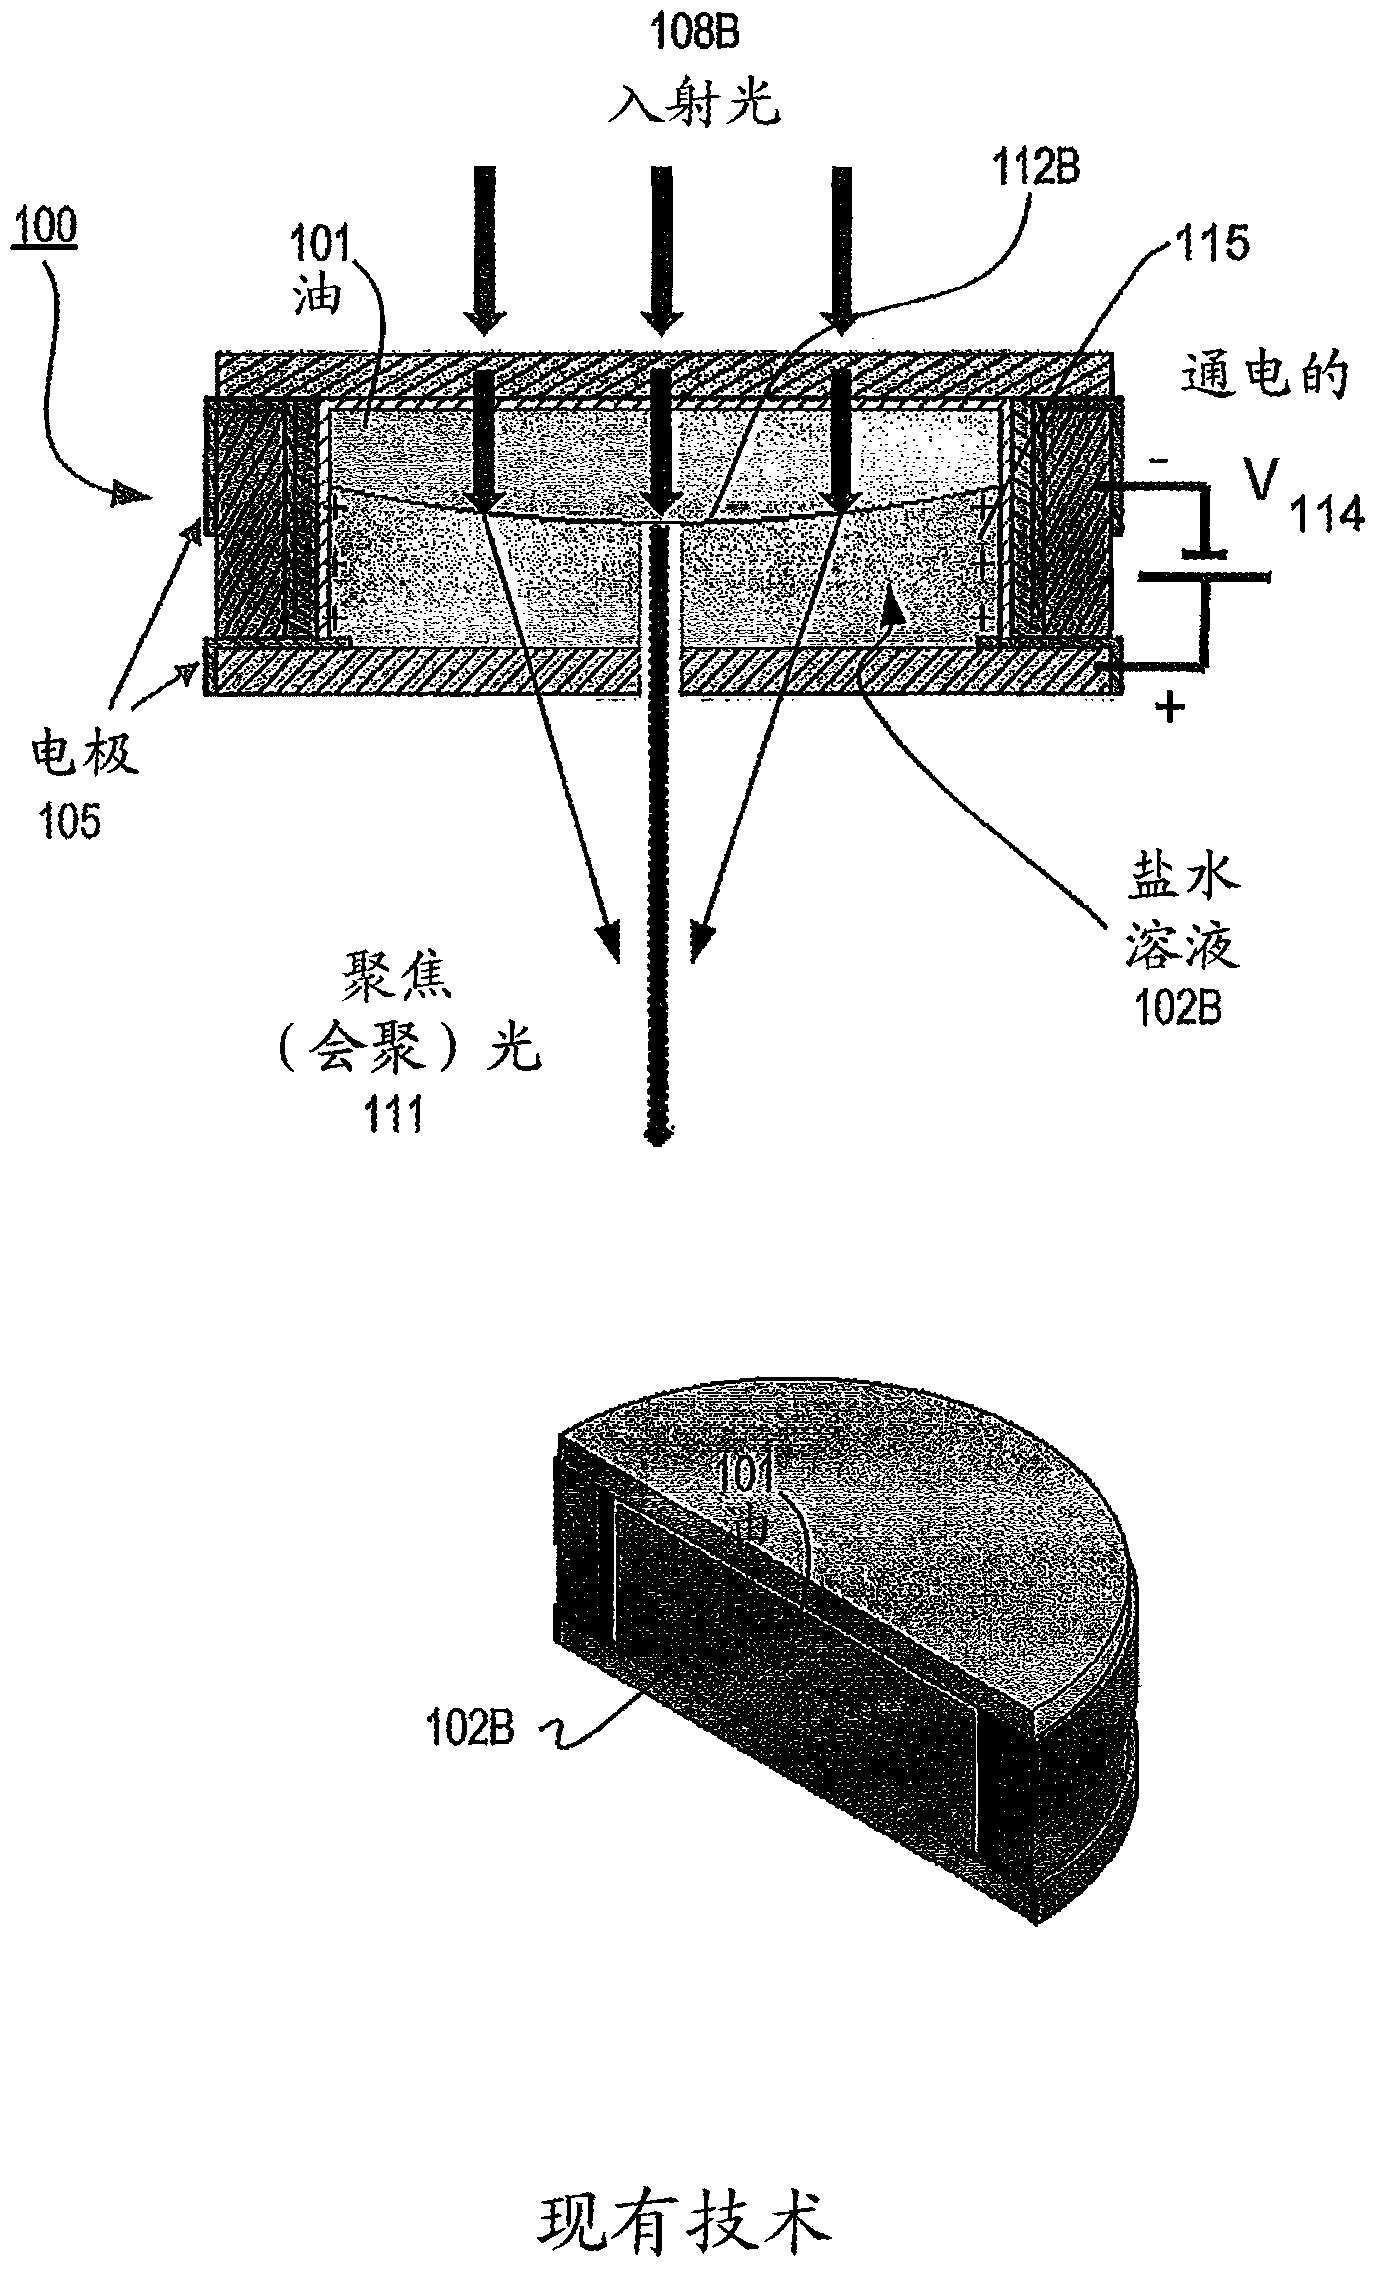 Processor controlled intraocular lens system